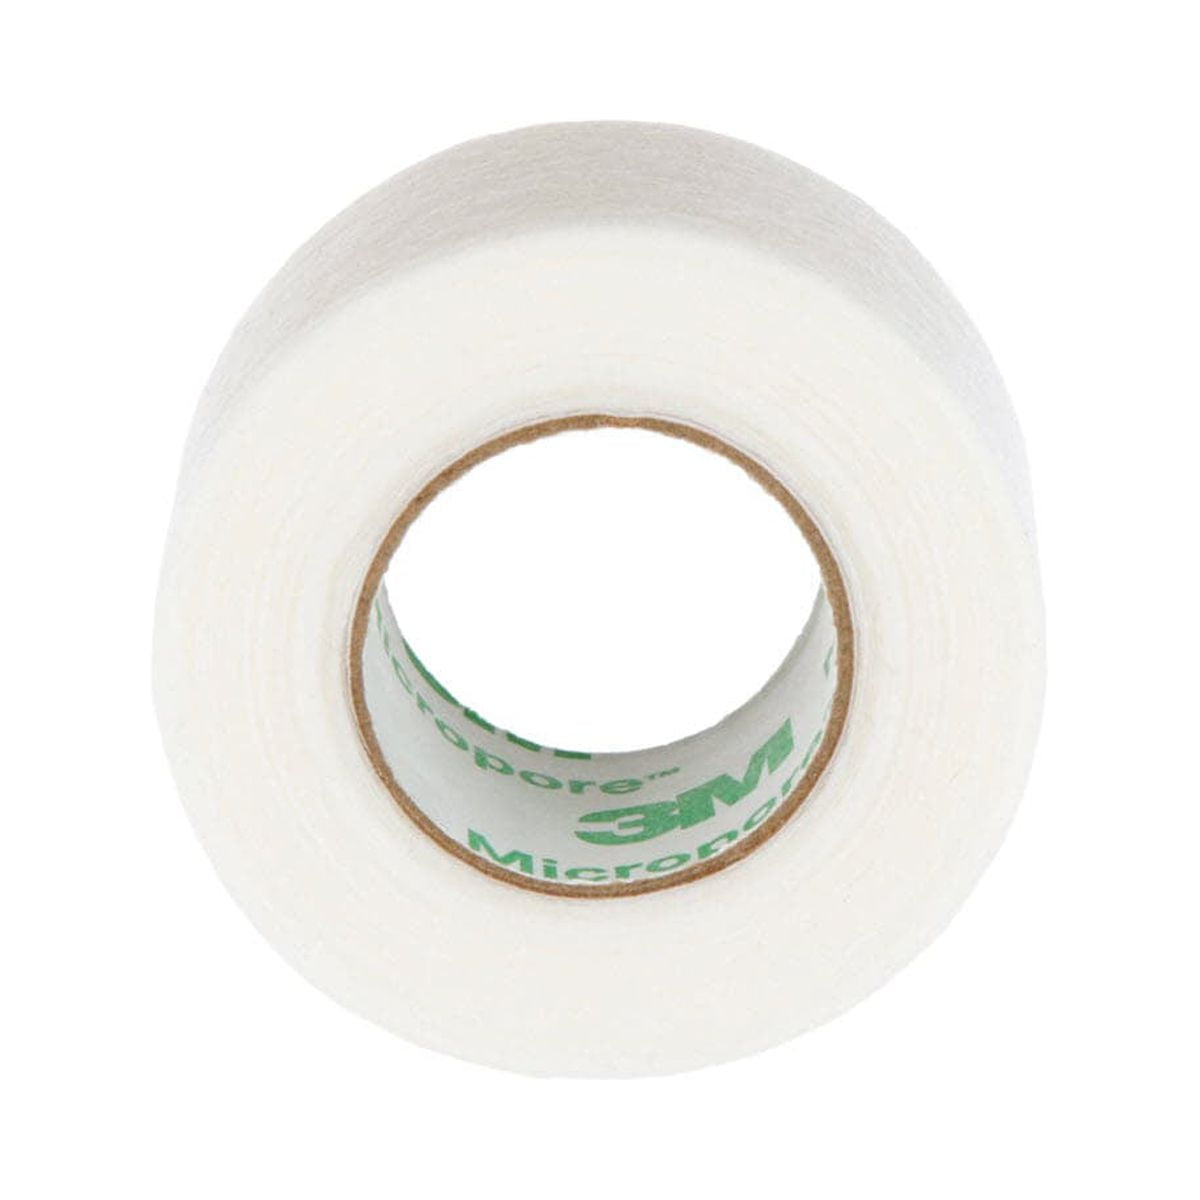 3M Micropore Paper Surgical Tape Standard Roll 3 X 10Yard, 4/bx